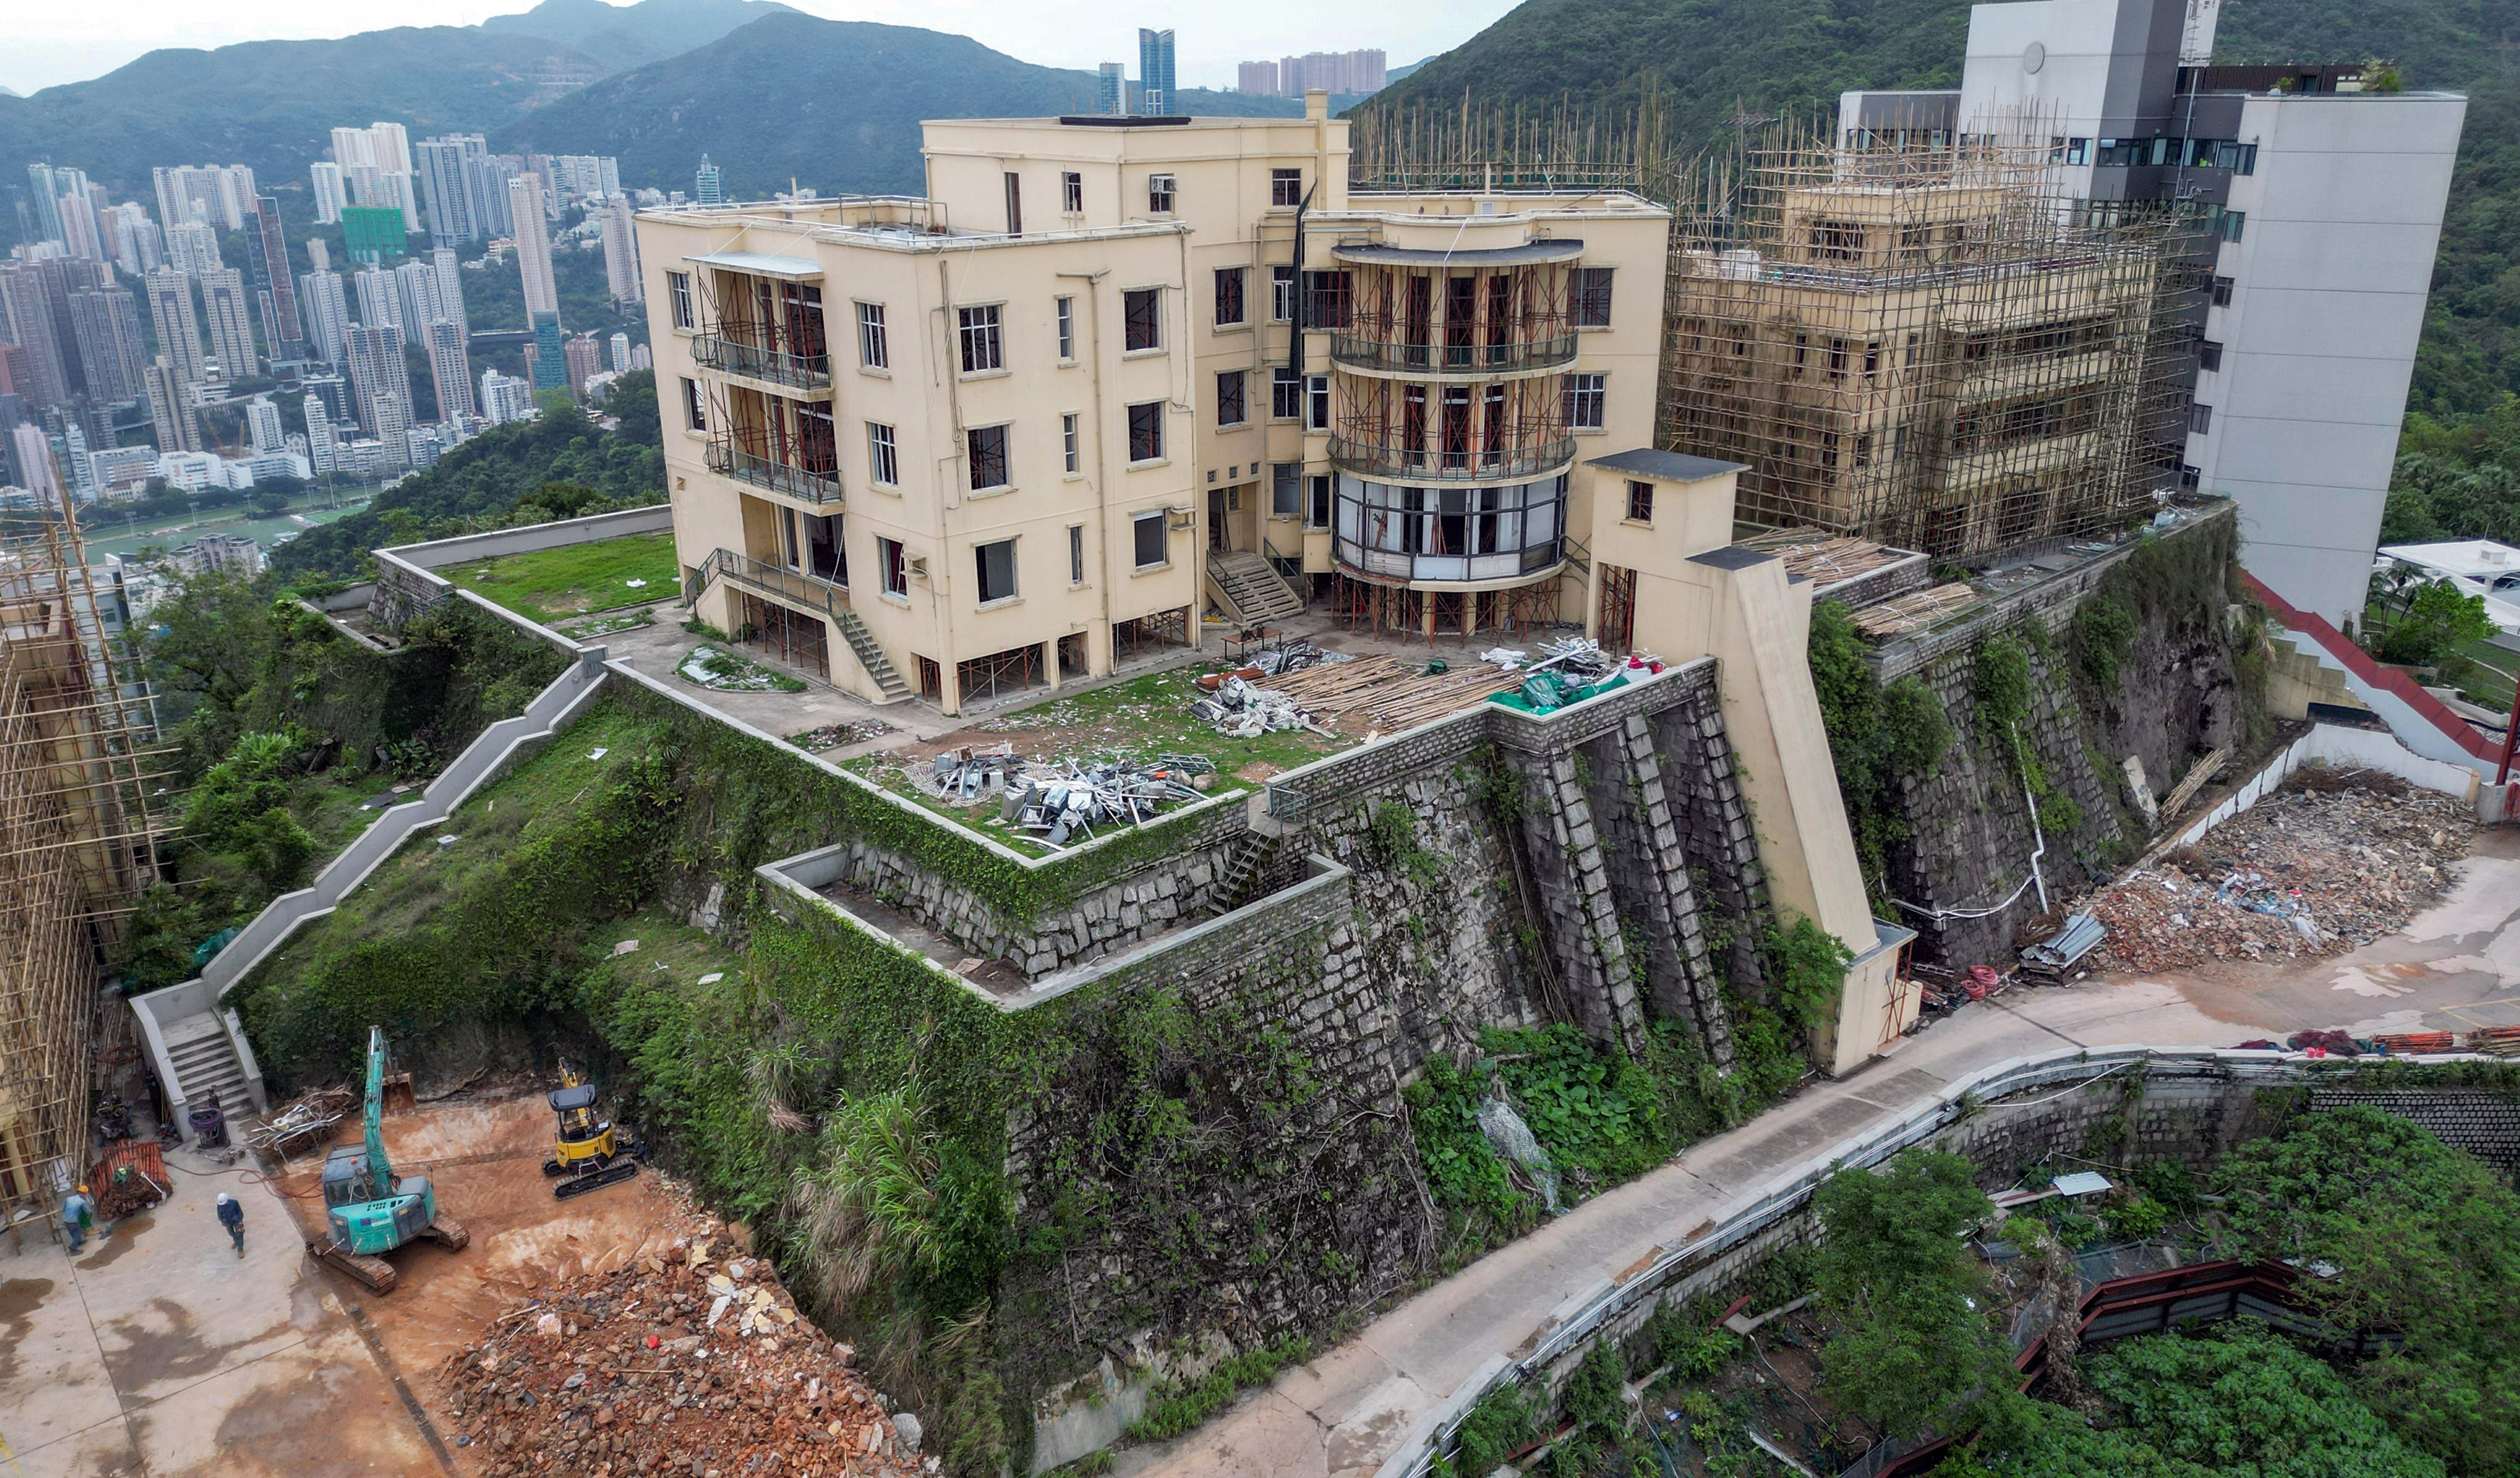 Construction is under way at the decades-old residential blocks Cameron Mansions, which is build on a former Japanese war memorial site. Photo: Dickson Lee